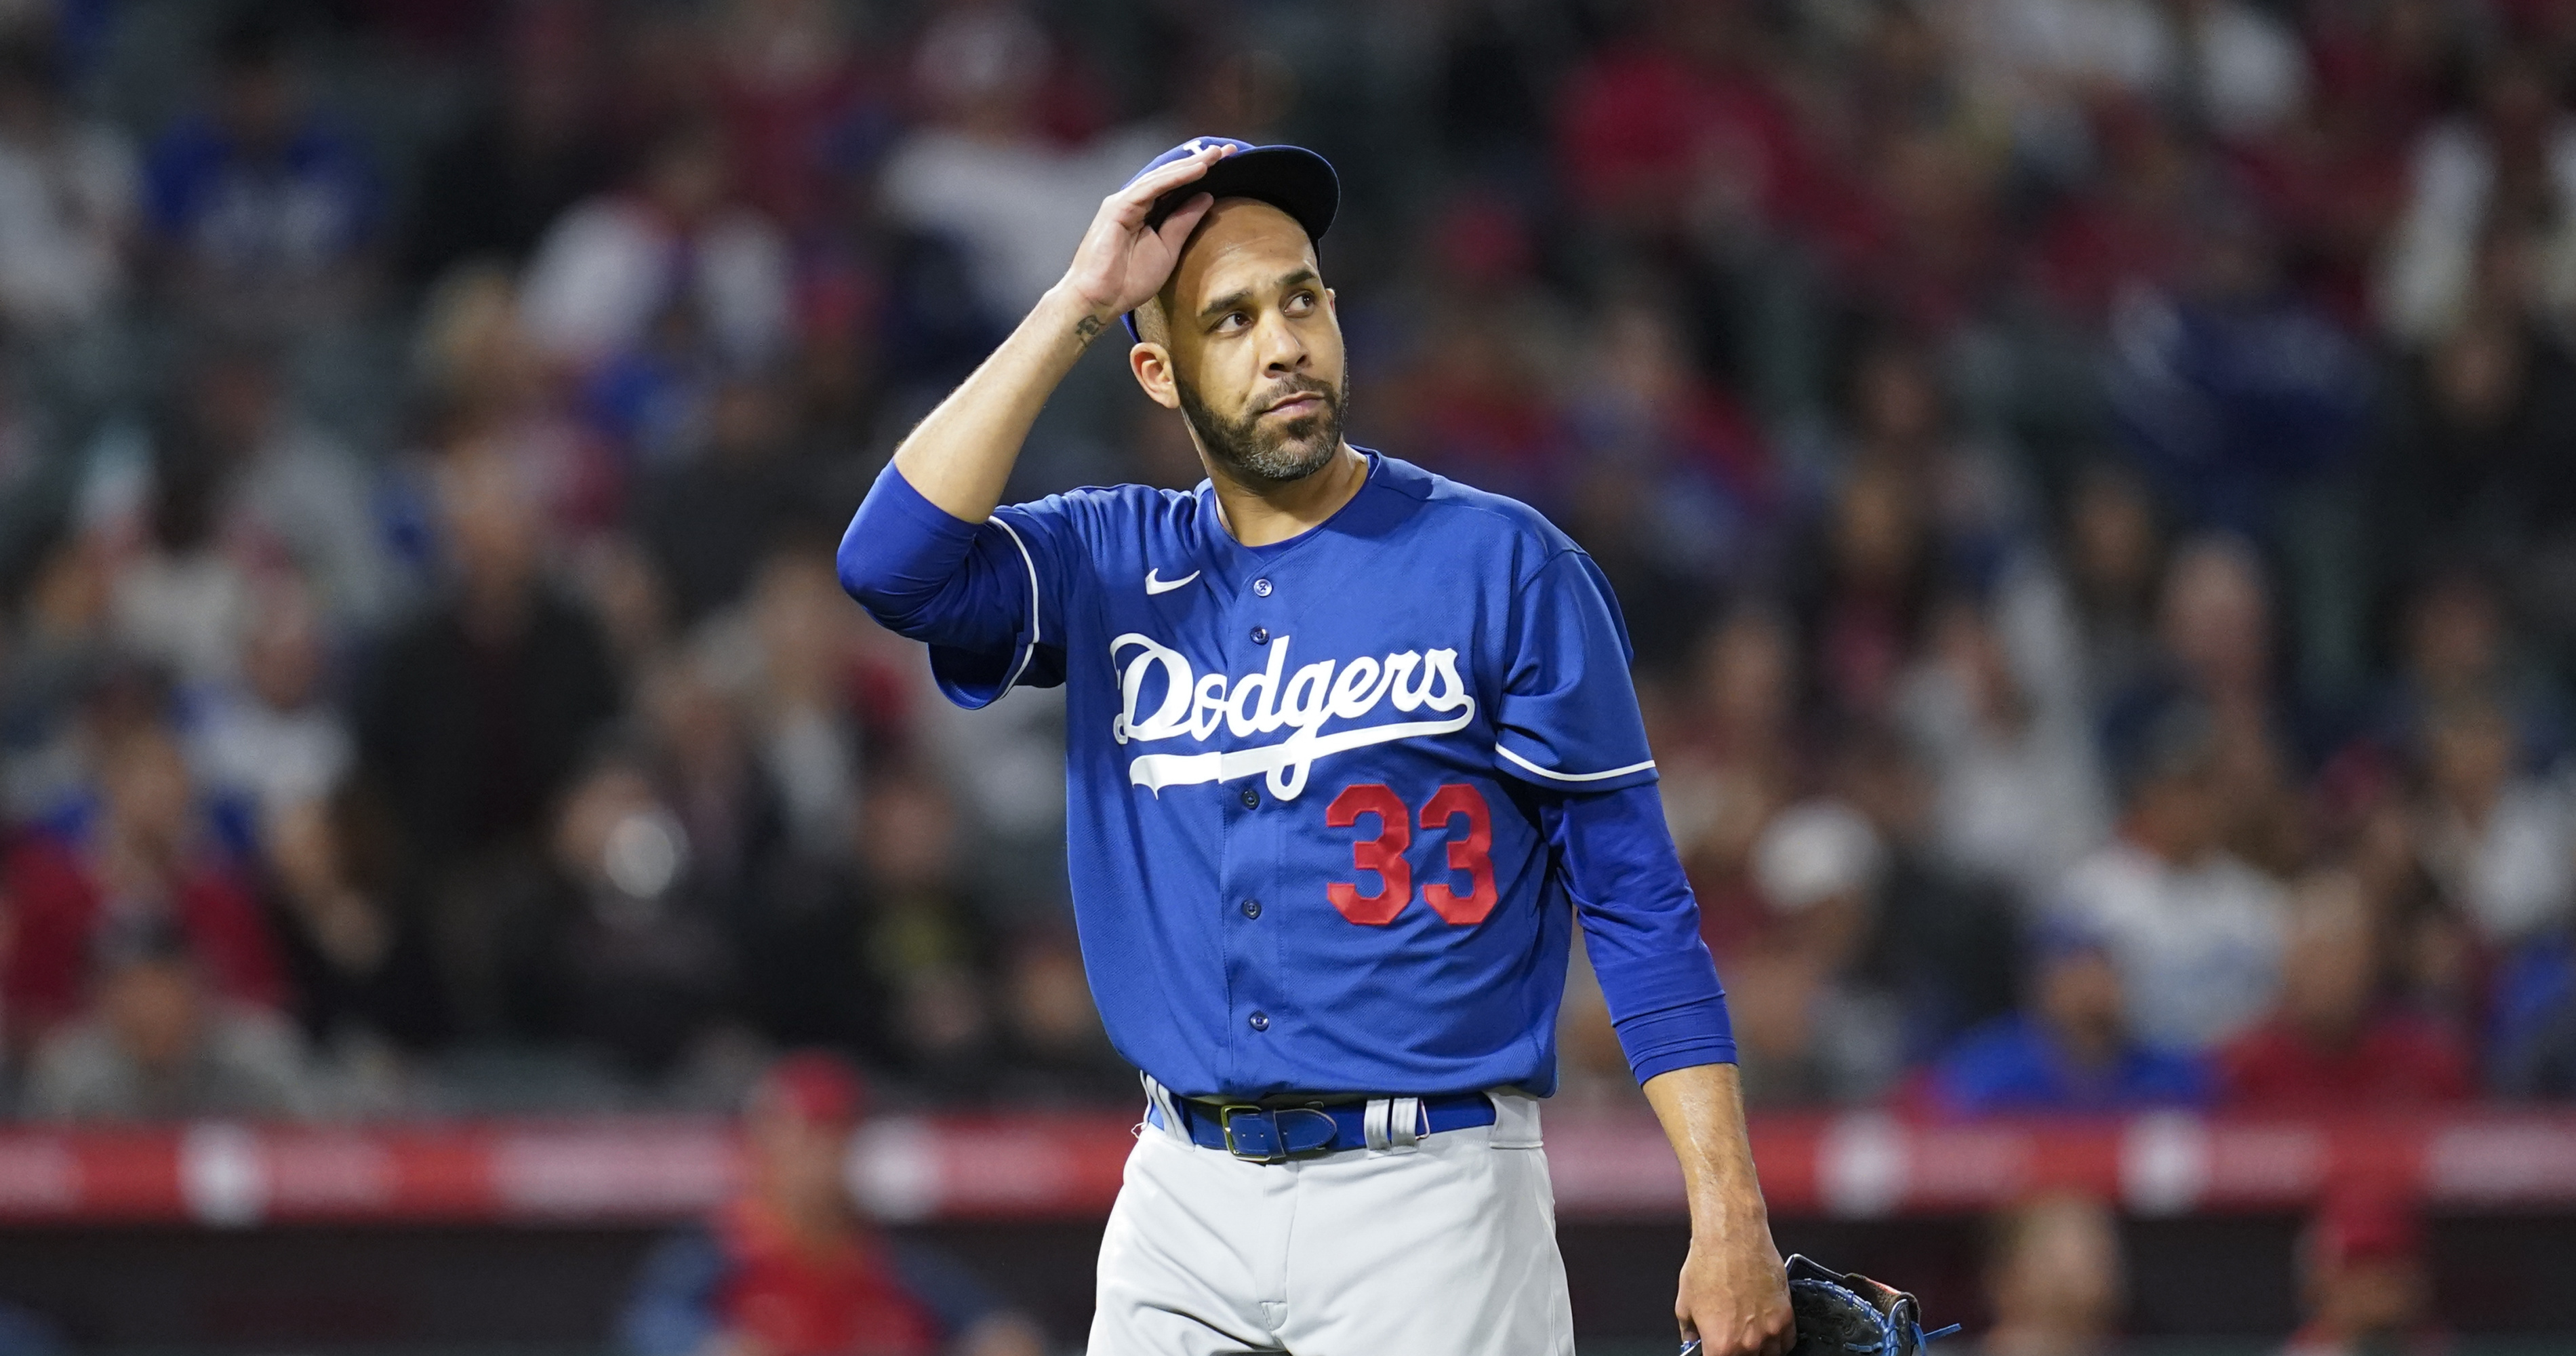 David Price to pay Dodgers minor-leaguers $1,000: report